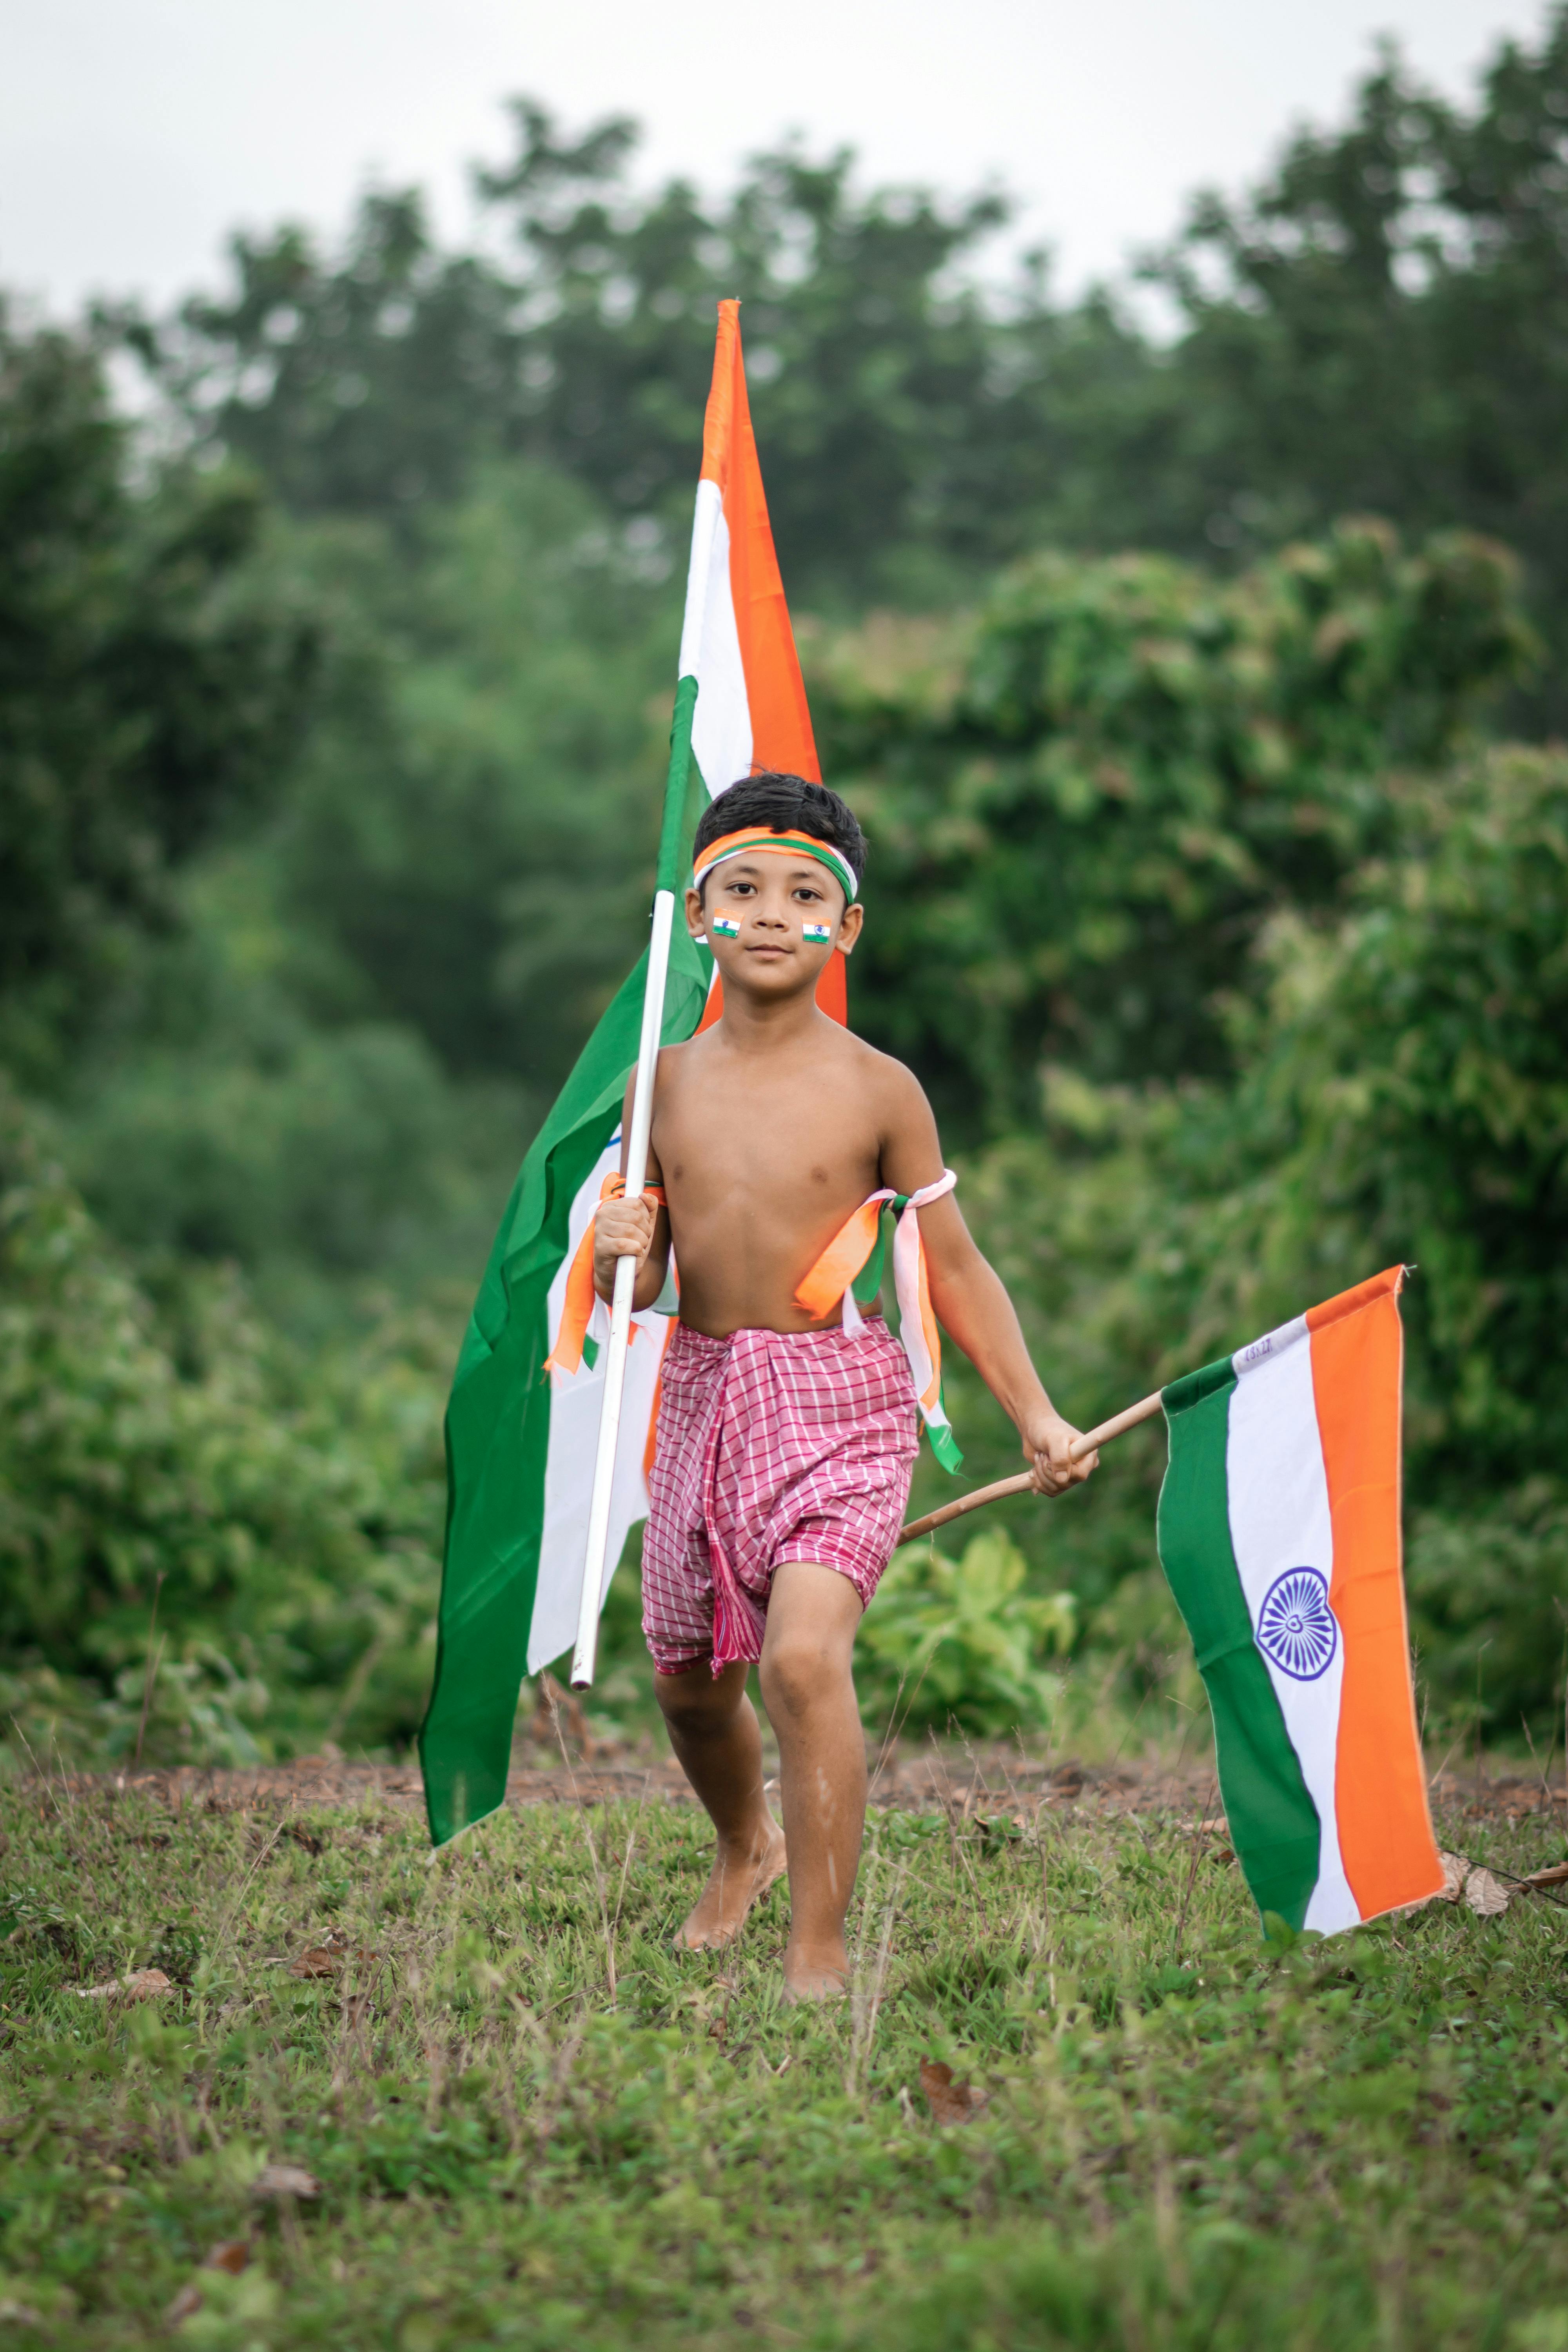 Indian Flag Videos, Download The BEST Free 4k Stock Video Footage & Indian  Flag HD Video Clips